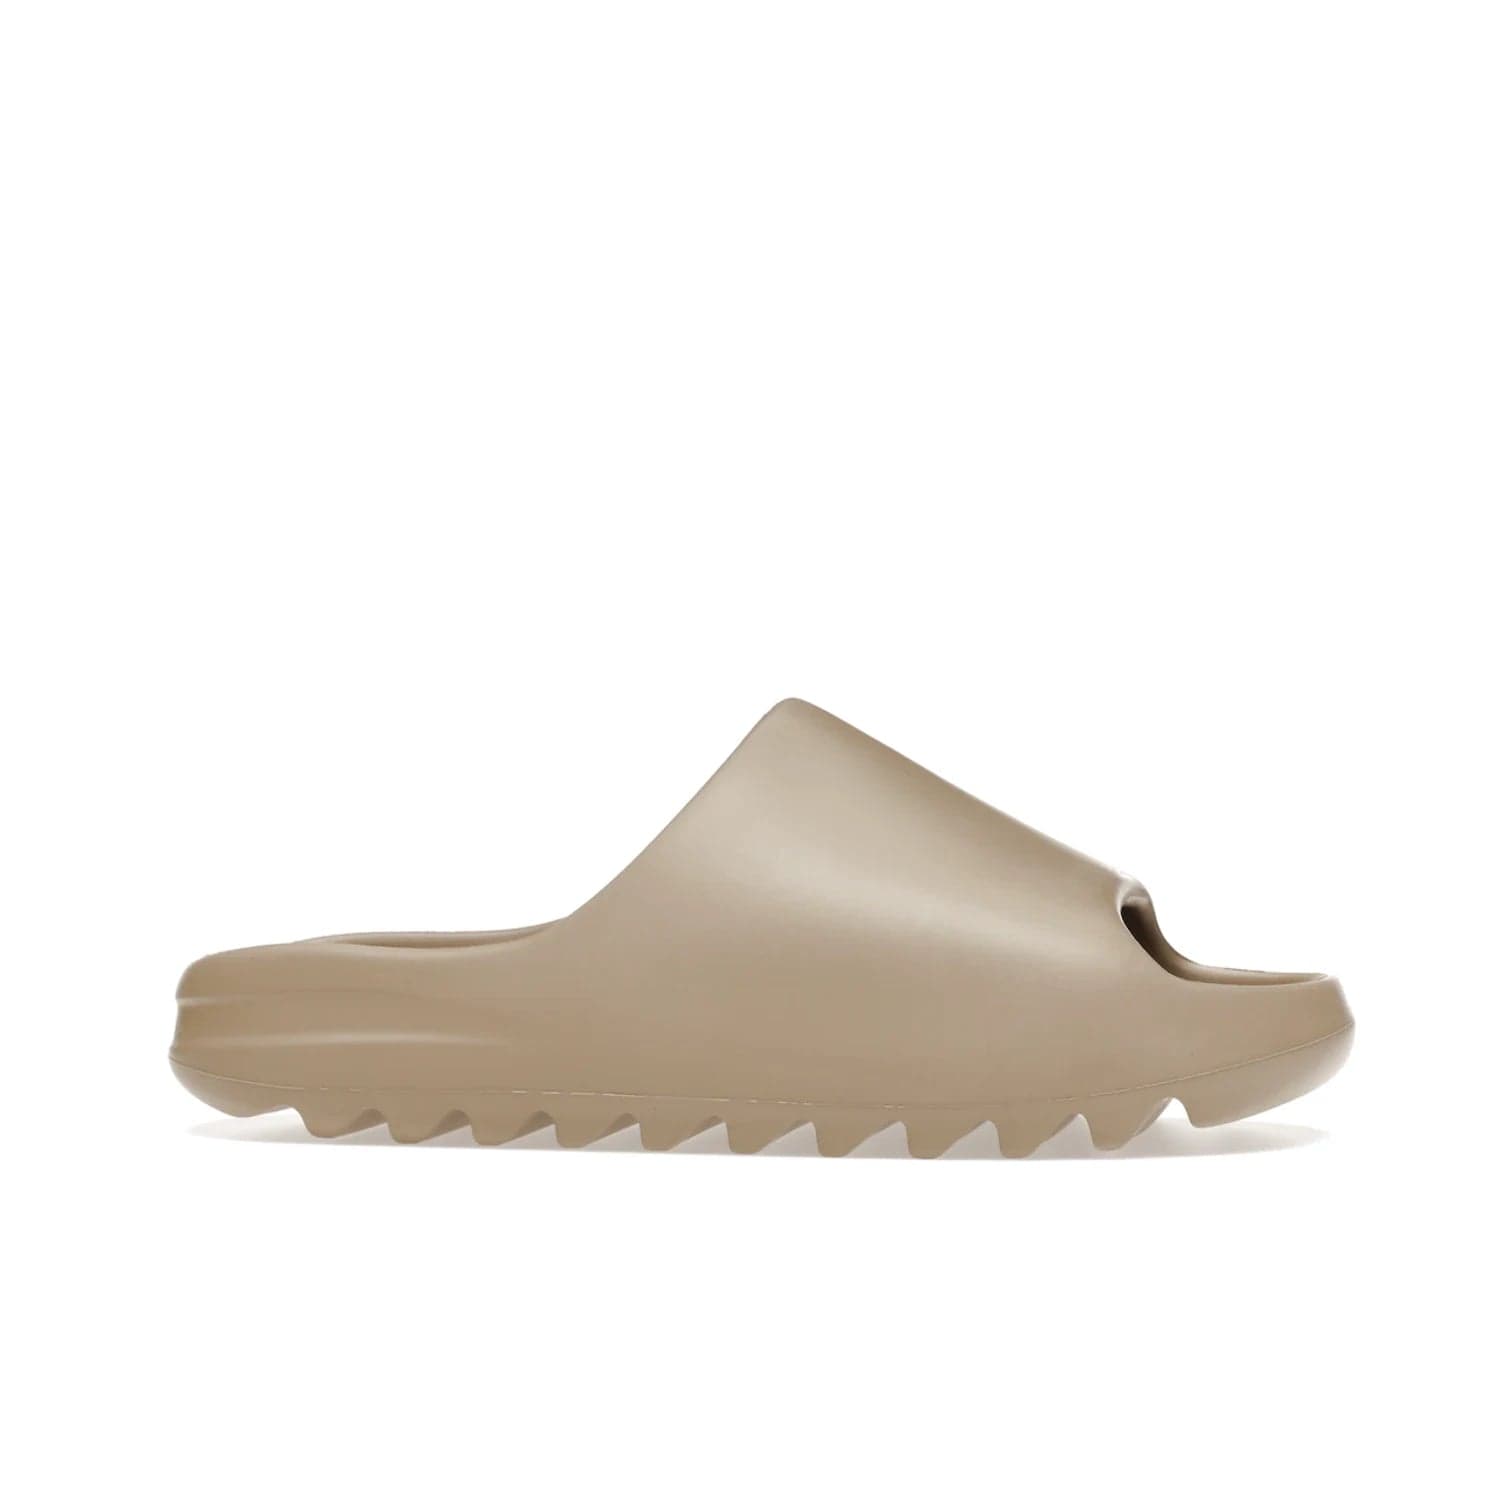 adidas Yeezy Slide Pure (First Release) - Image 2 - Only at www.BallersClubKickz.com - Shop the new adidas Yeezy Slide Pure at adidas. Crafted with a Pure EVA foam upper and soft footbed for instant comfort. Outsole with grooves offers traction & support for a perfect summer look. Available in Pure/Pure/Pure.